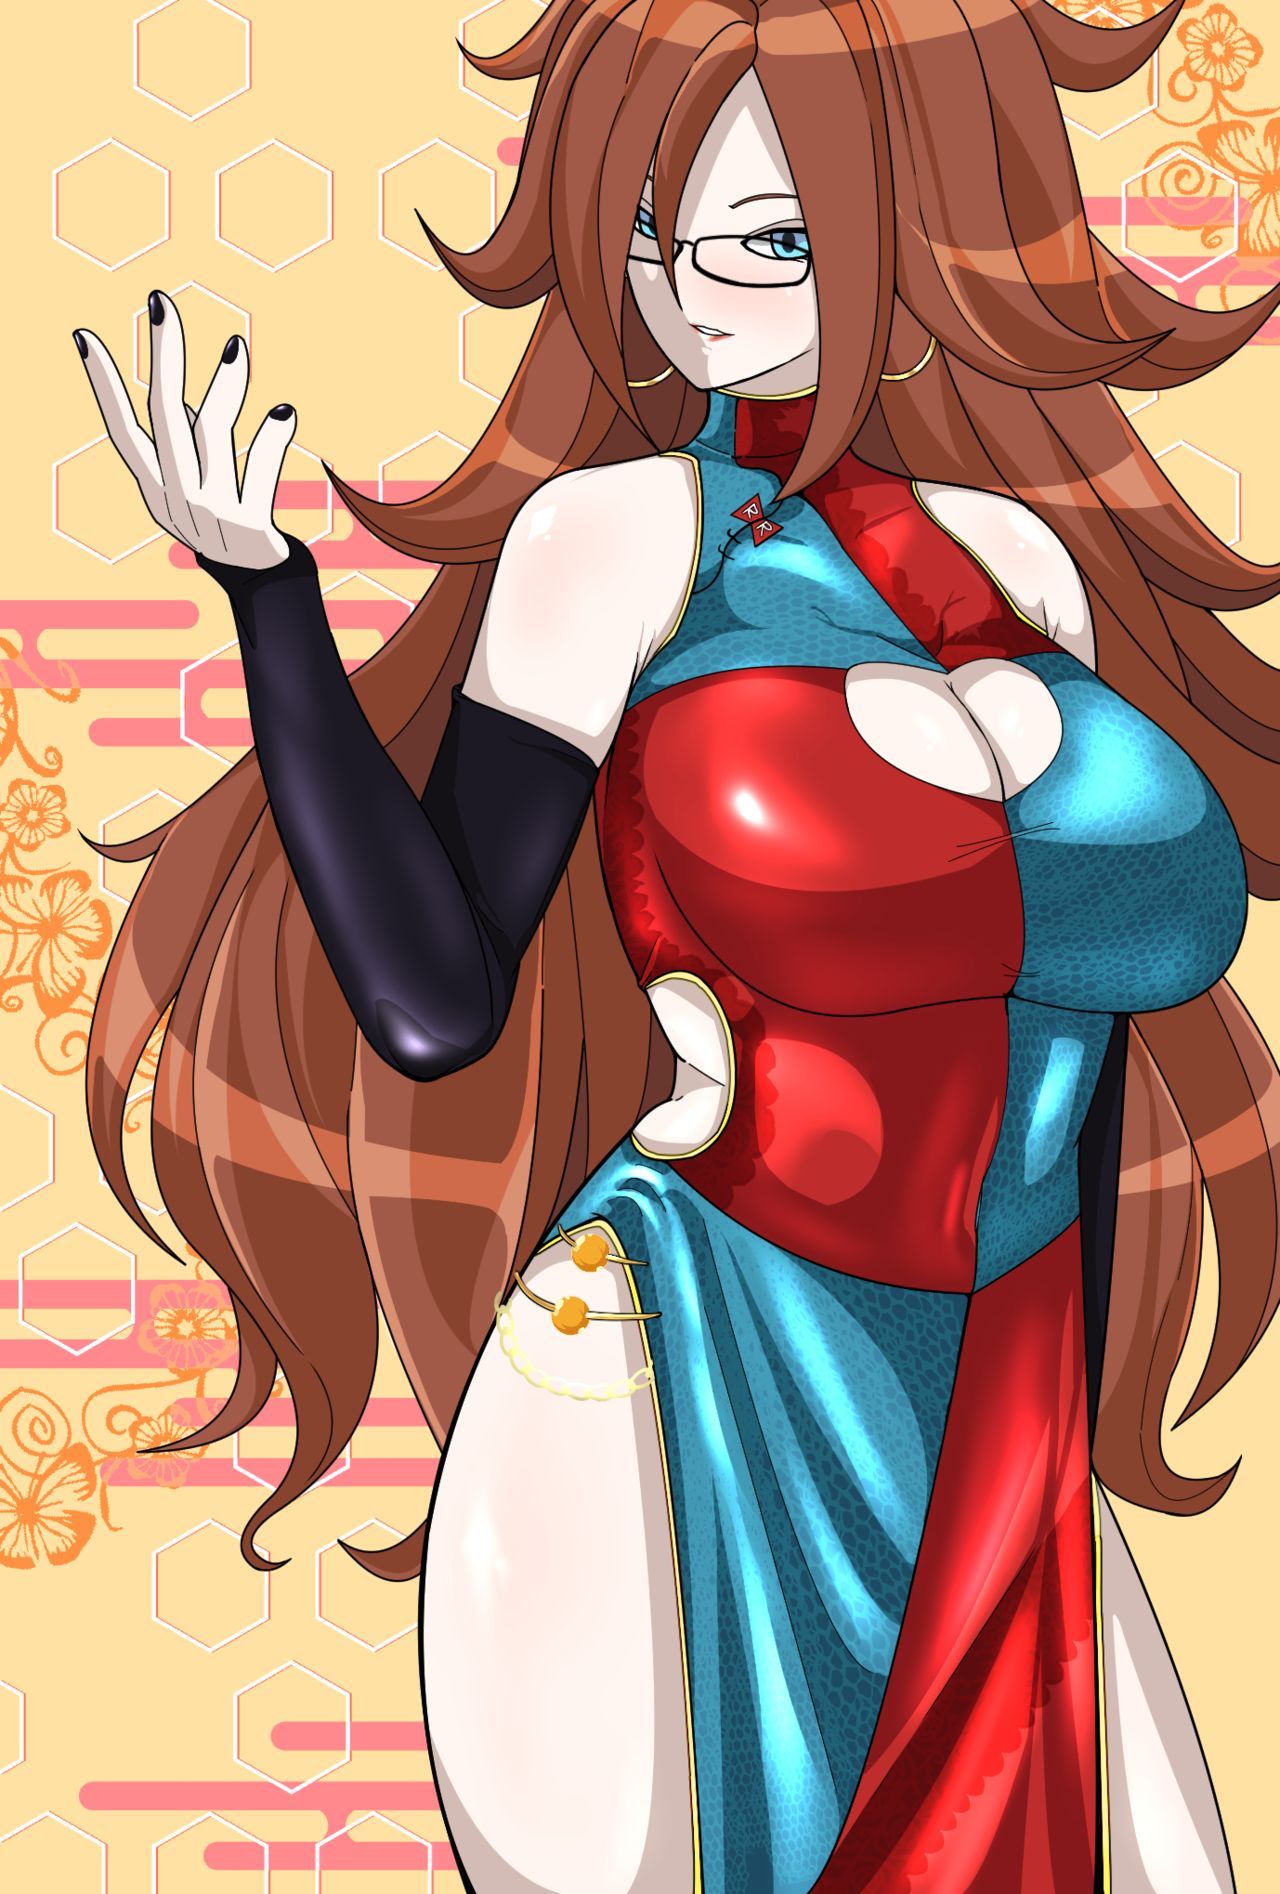 My Favorite Android 21 Pics 10